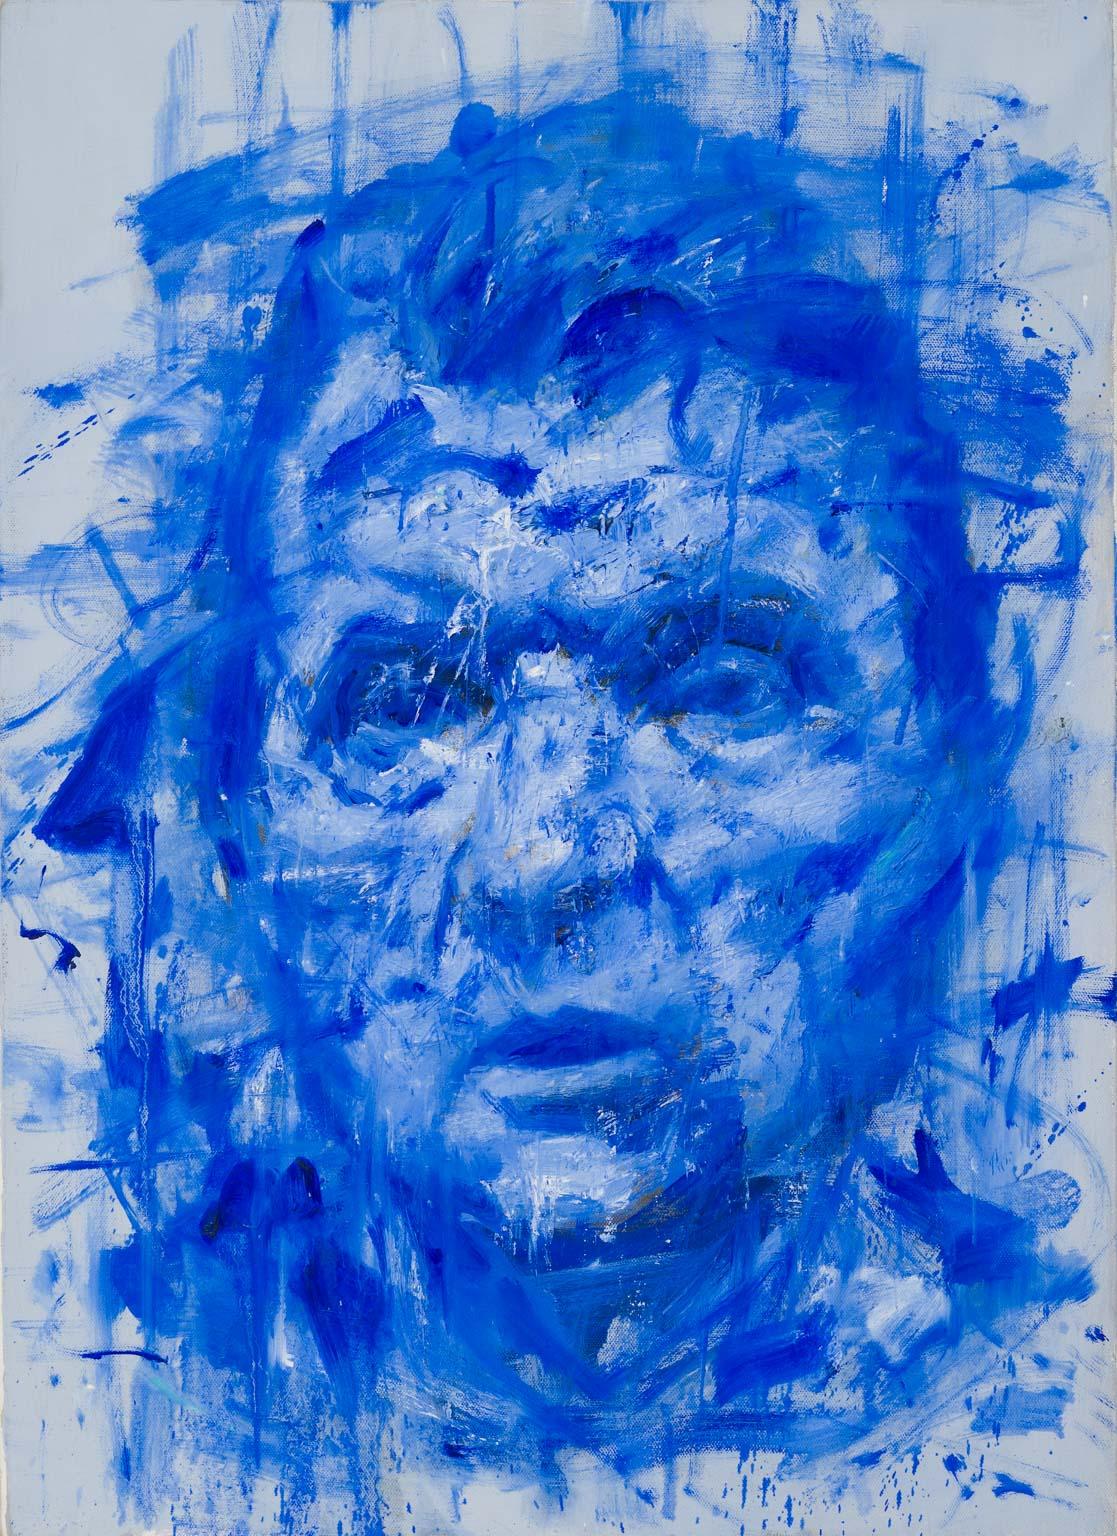 Milan Markovich Portrait Painting - Blue Lord - contemporary oil painting, portrait of Francis Bacon in blue 